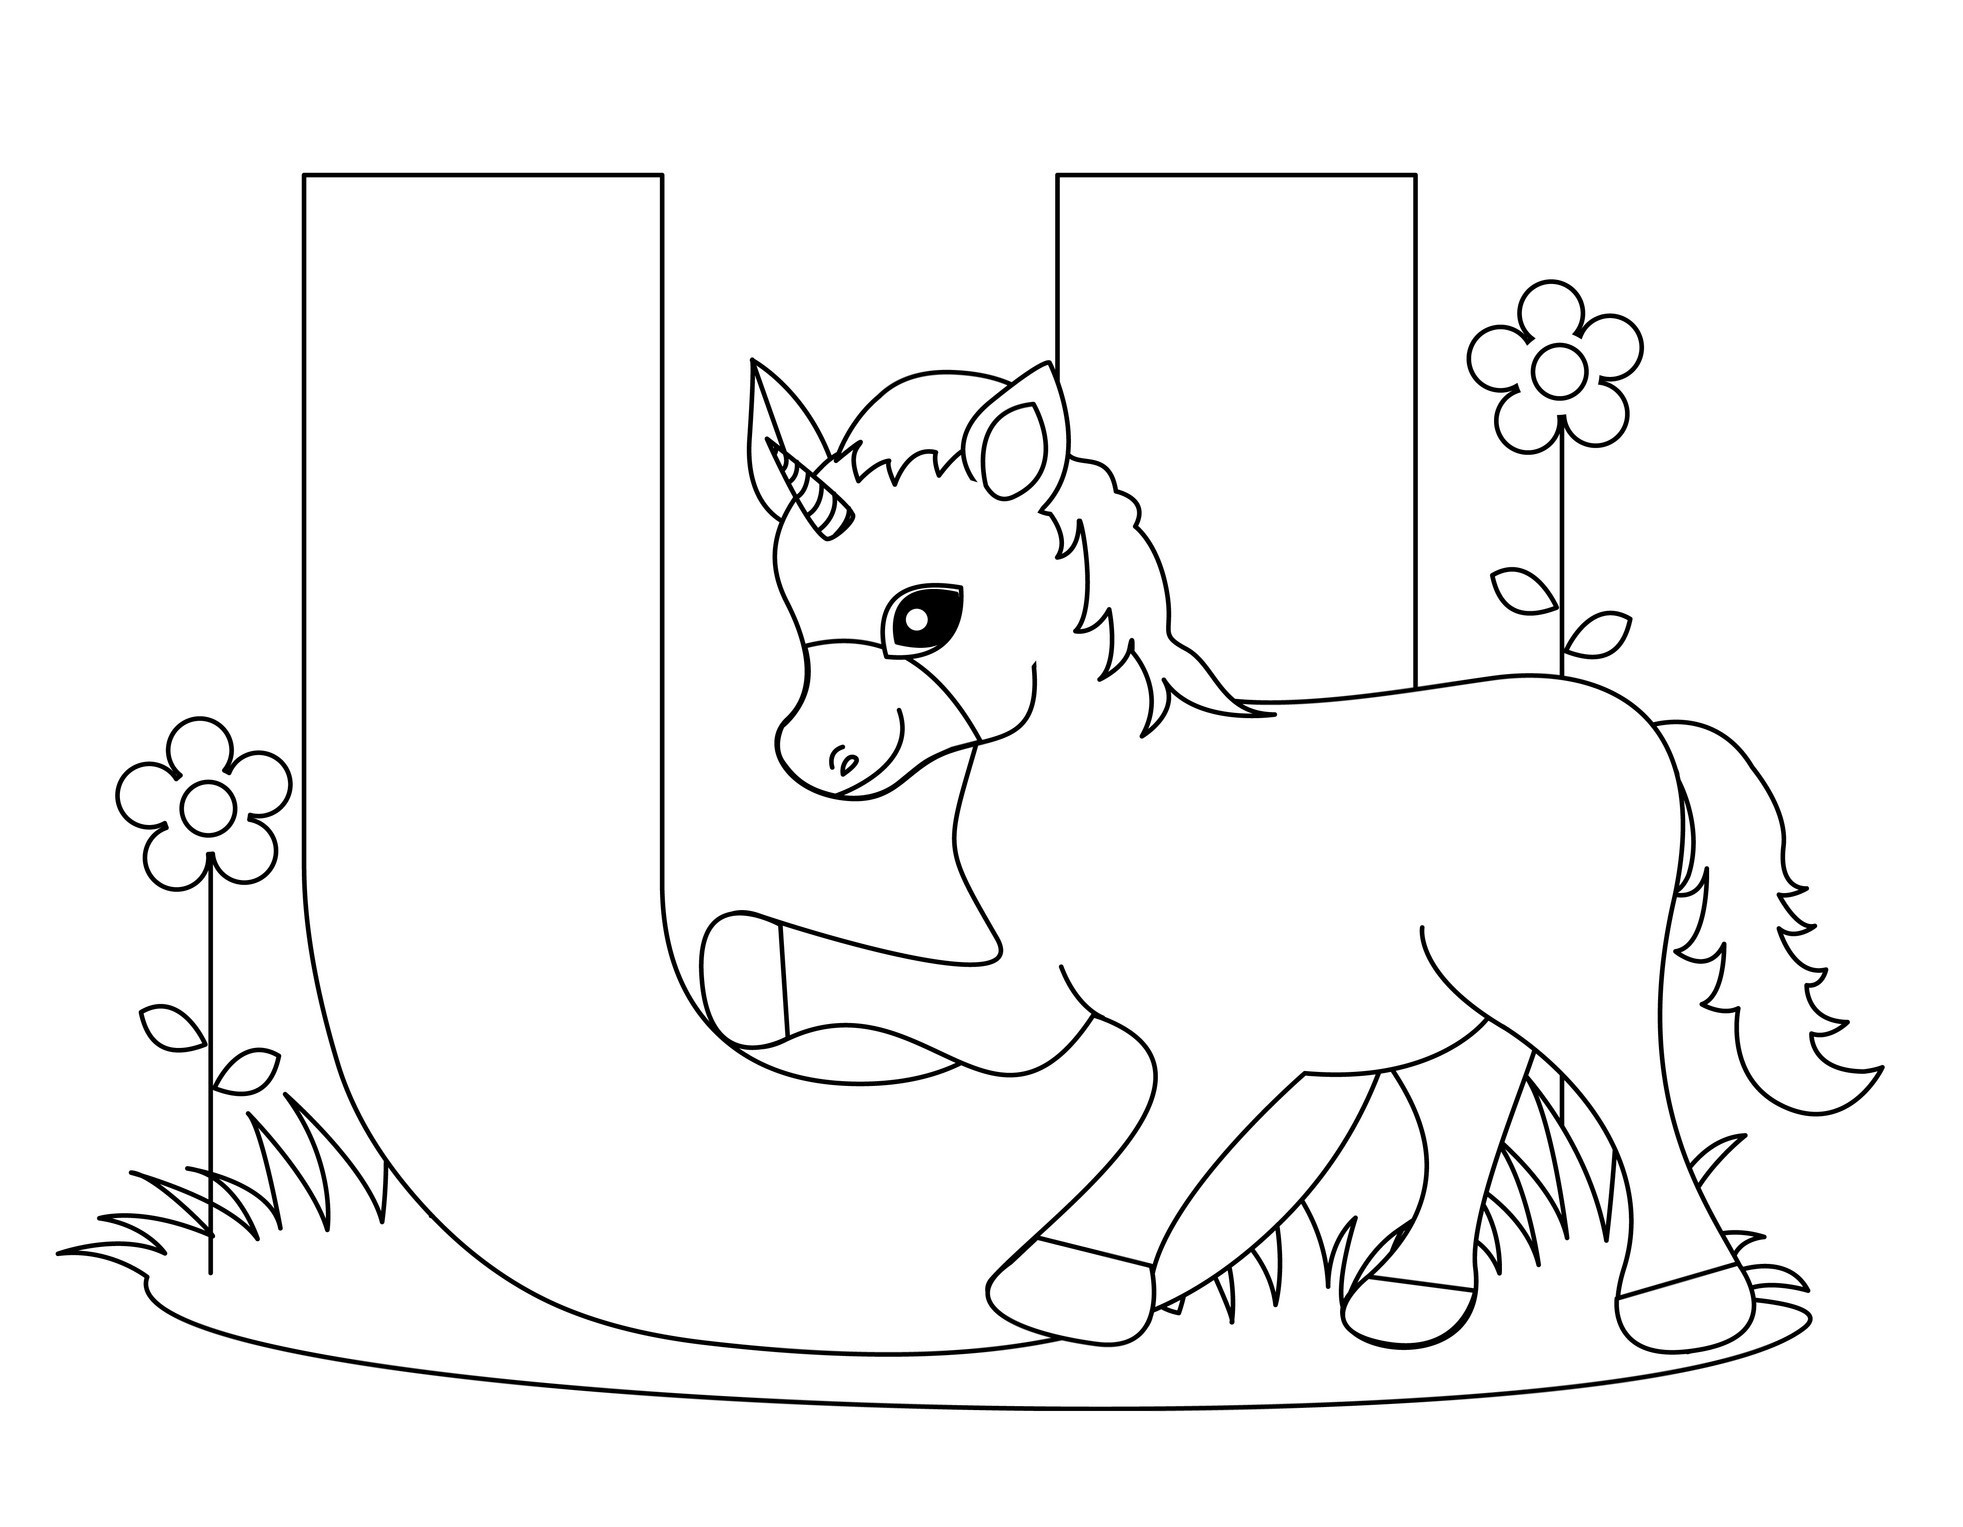 Letters Coloring Pages For Kids
 Free Printable Alphabet Coloring Pages for Kids Best